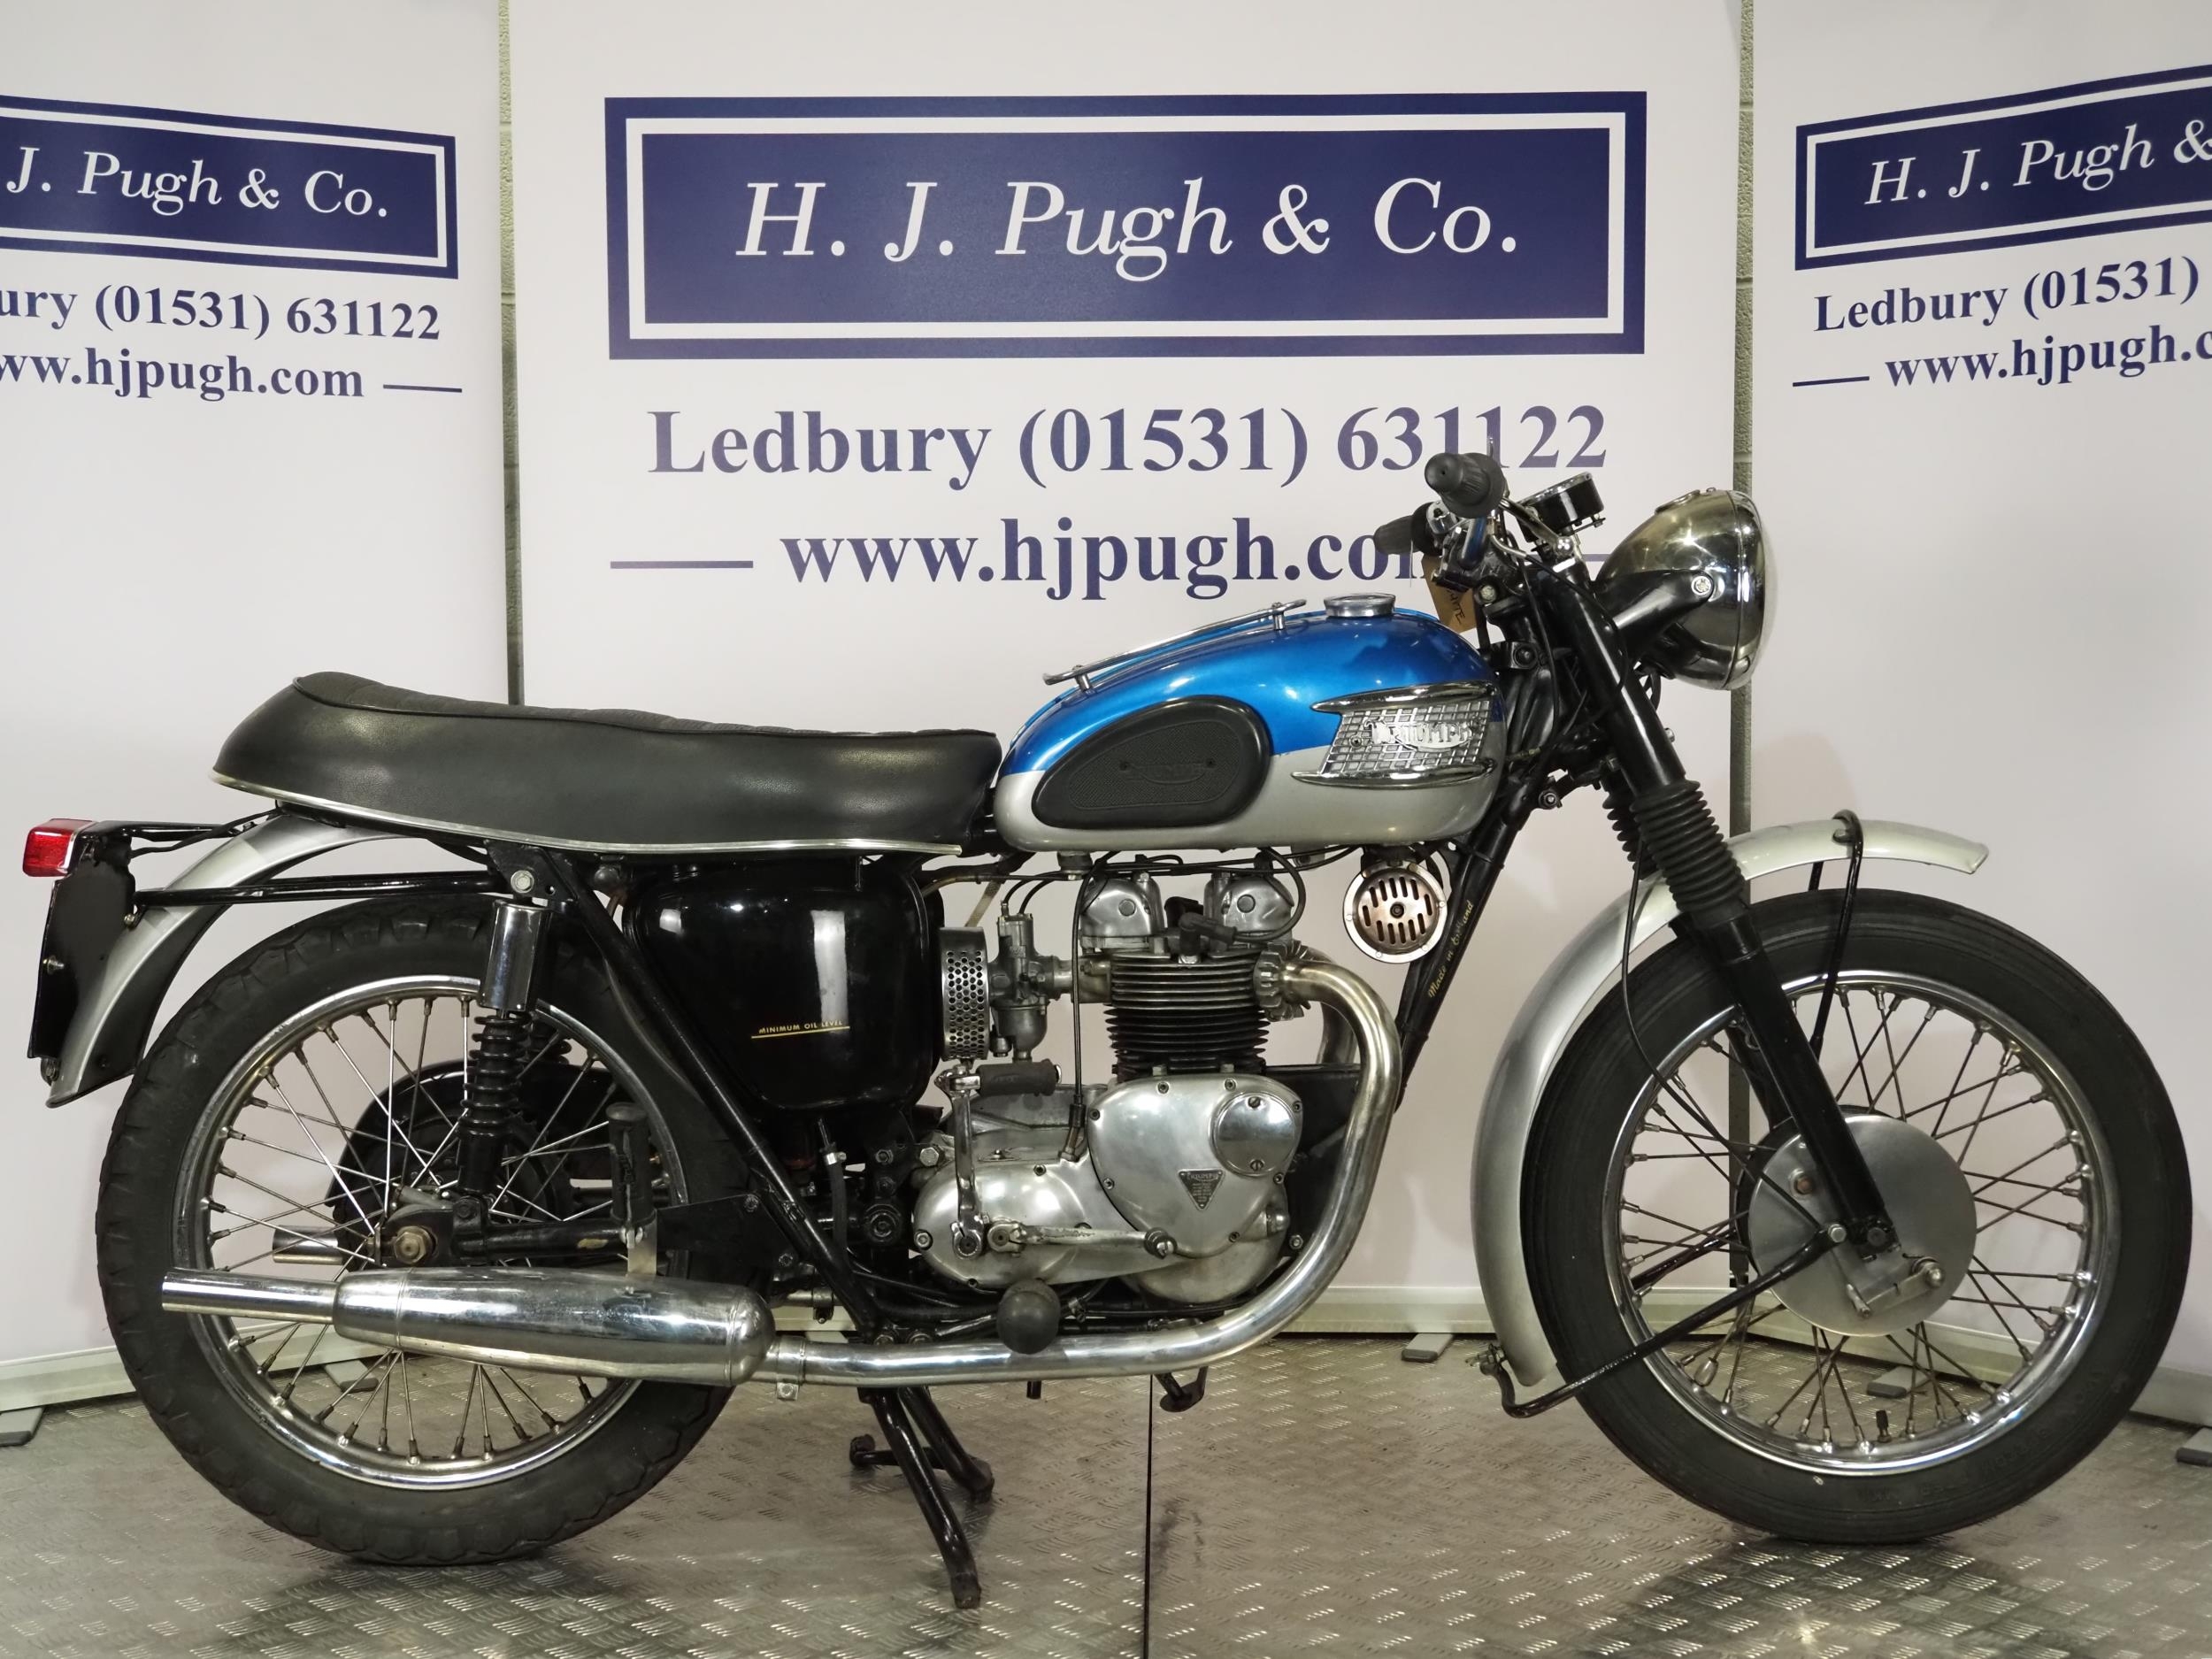 Triumph 350 motorcycle. 1958. 350cc Frame No. H4290 Engine No. T90 H29827 Runs and rides. Had been